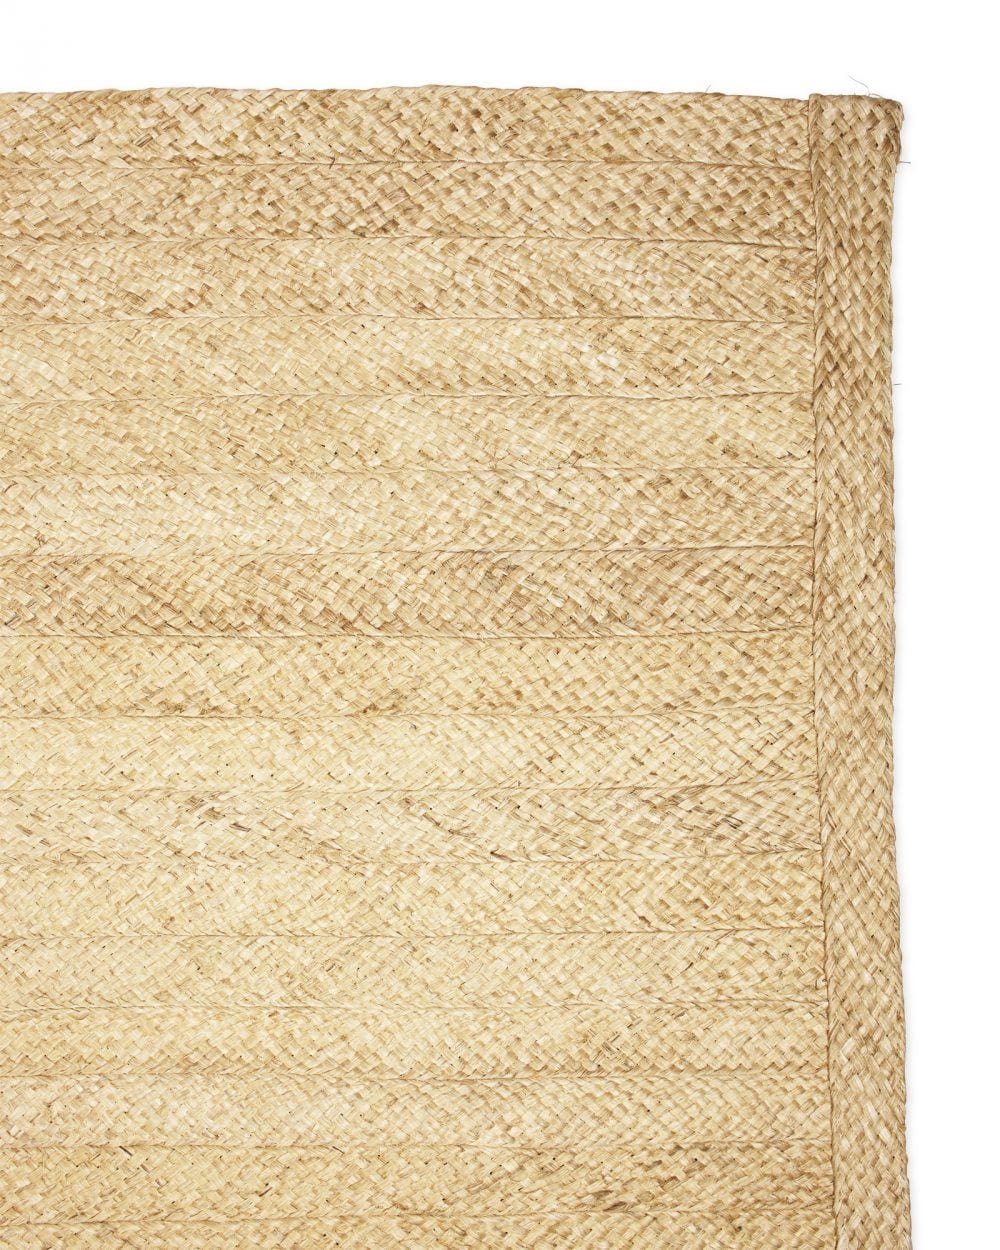 Abaca rug from Serena and Lily